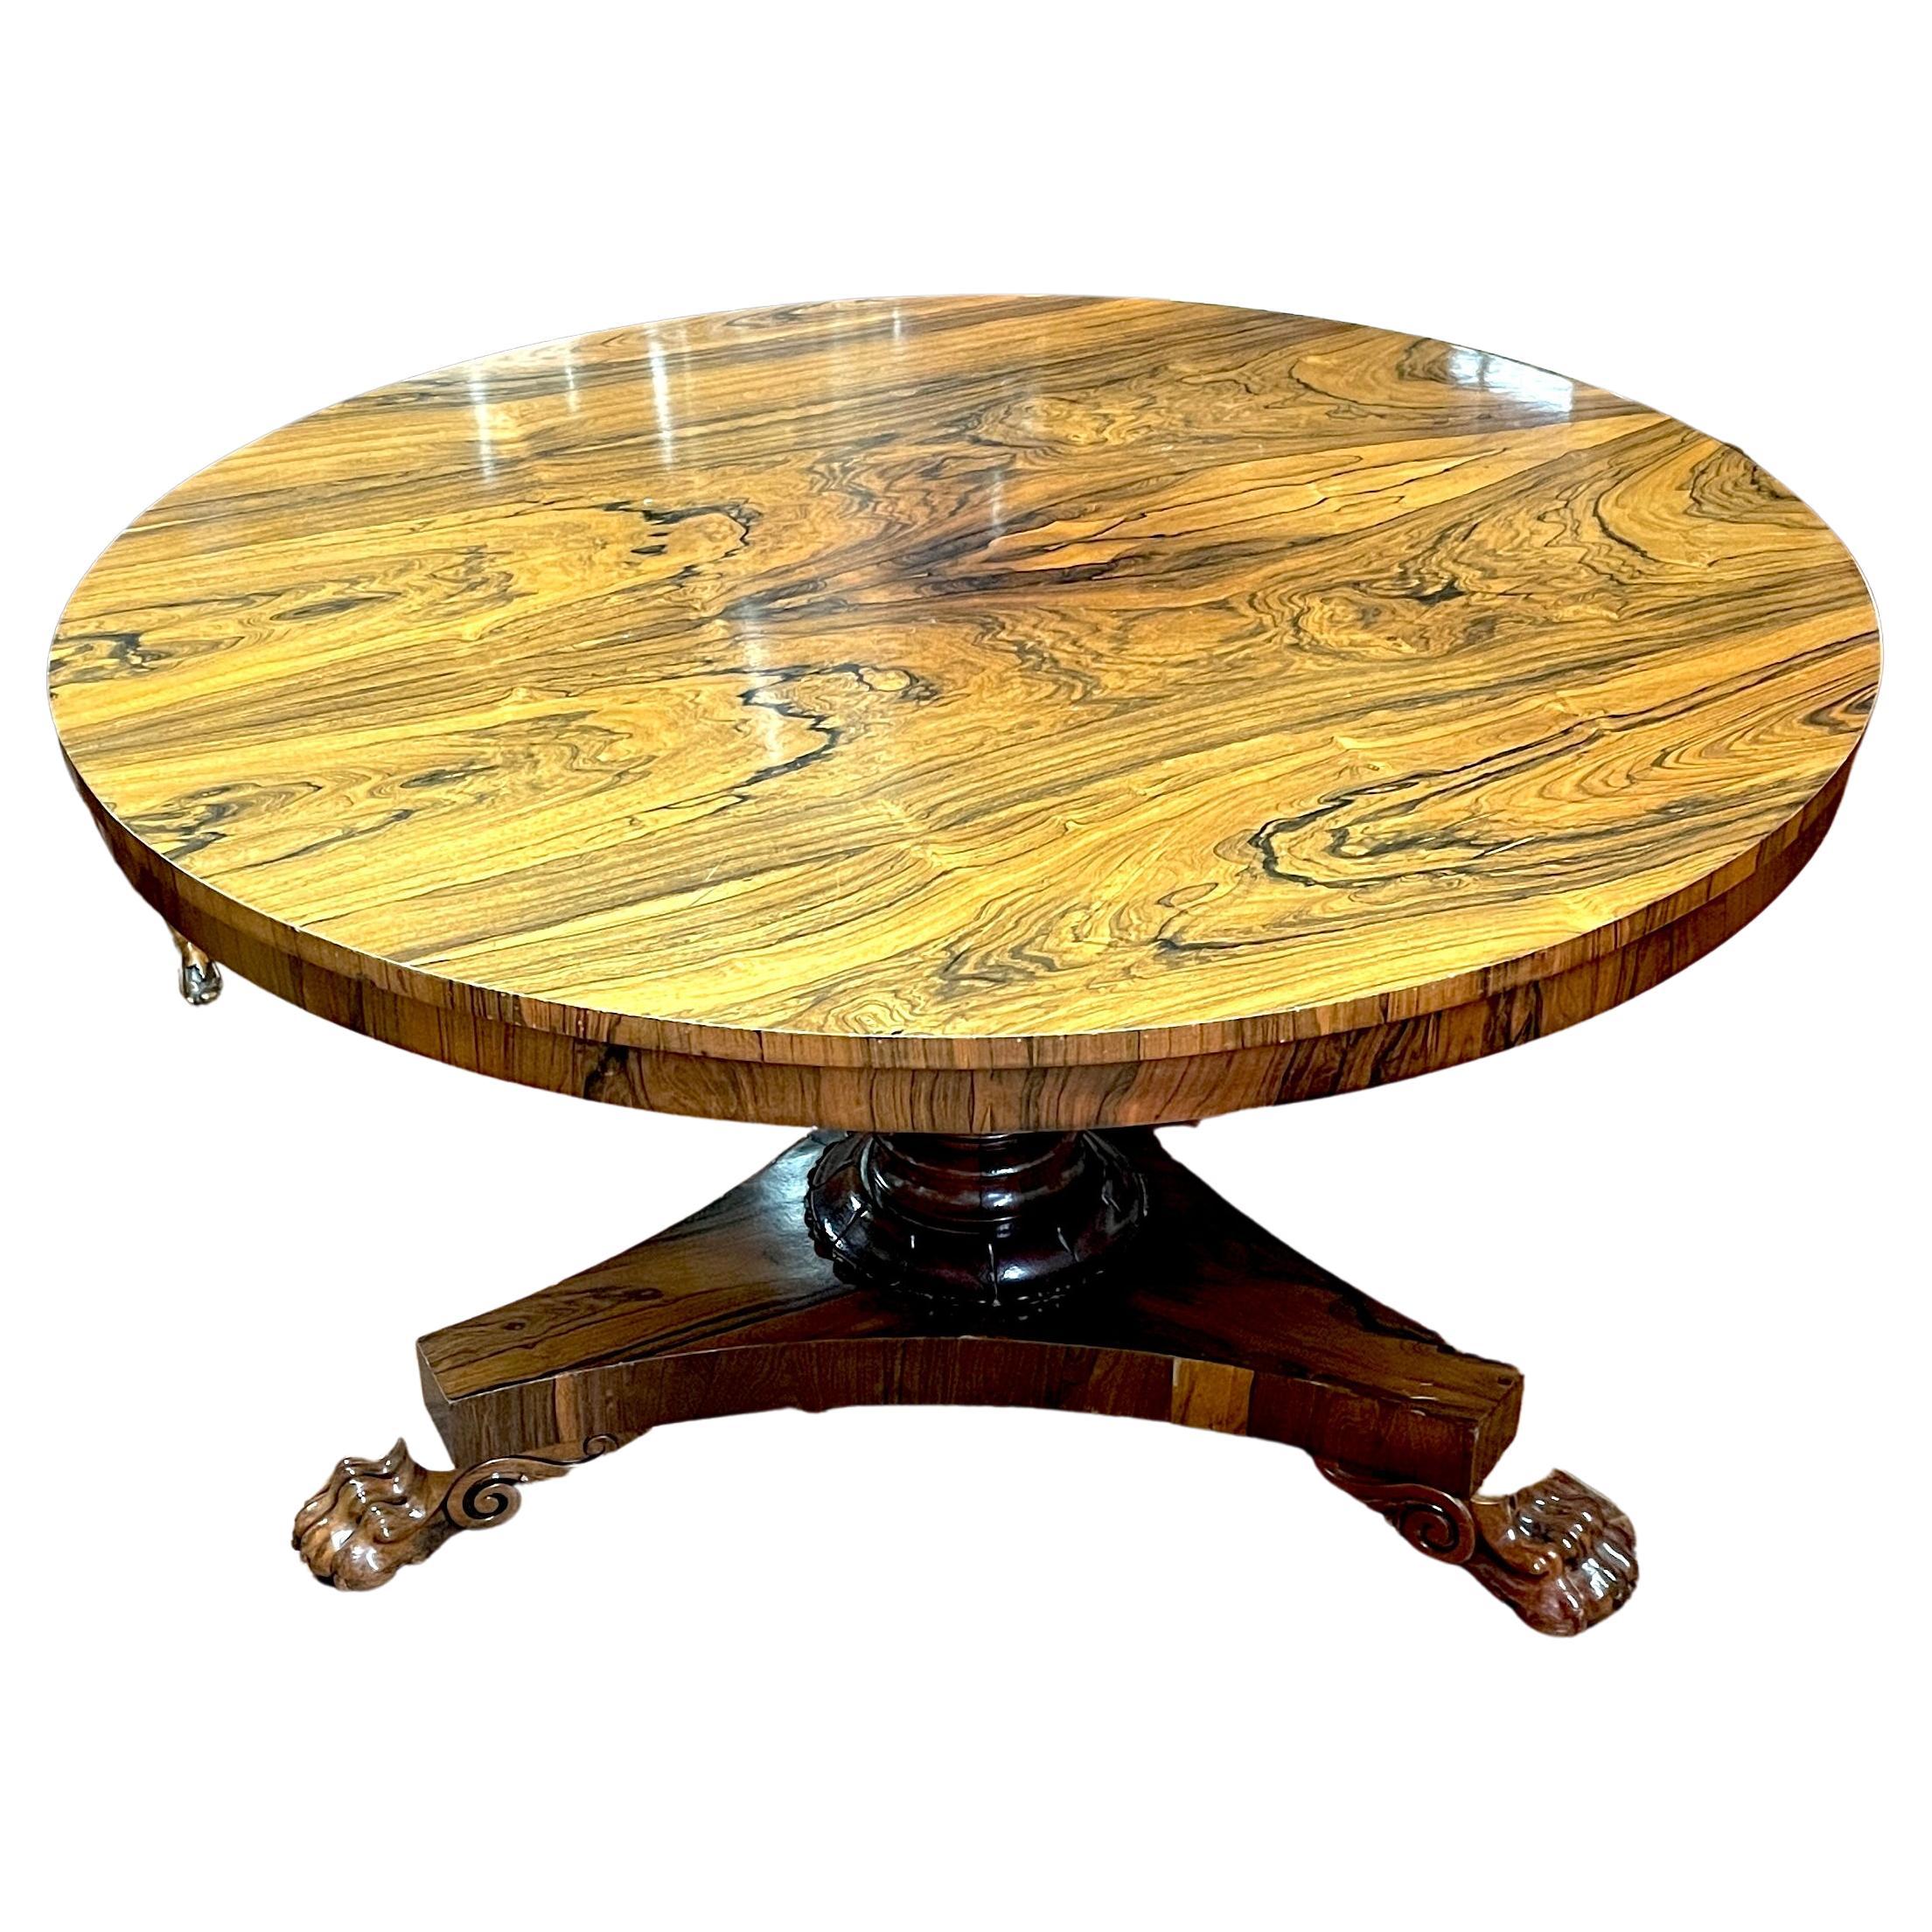 Quite possibly the Finest Period William IV Regency Antique English highly figured bookmatched Rosewood Circular Centre, Breakfast, Foyer or Dining Table.  Seats up to six comfortably. The top is veneered in extraordinarily fine bookmatched rosewood